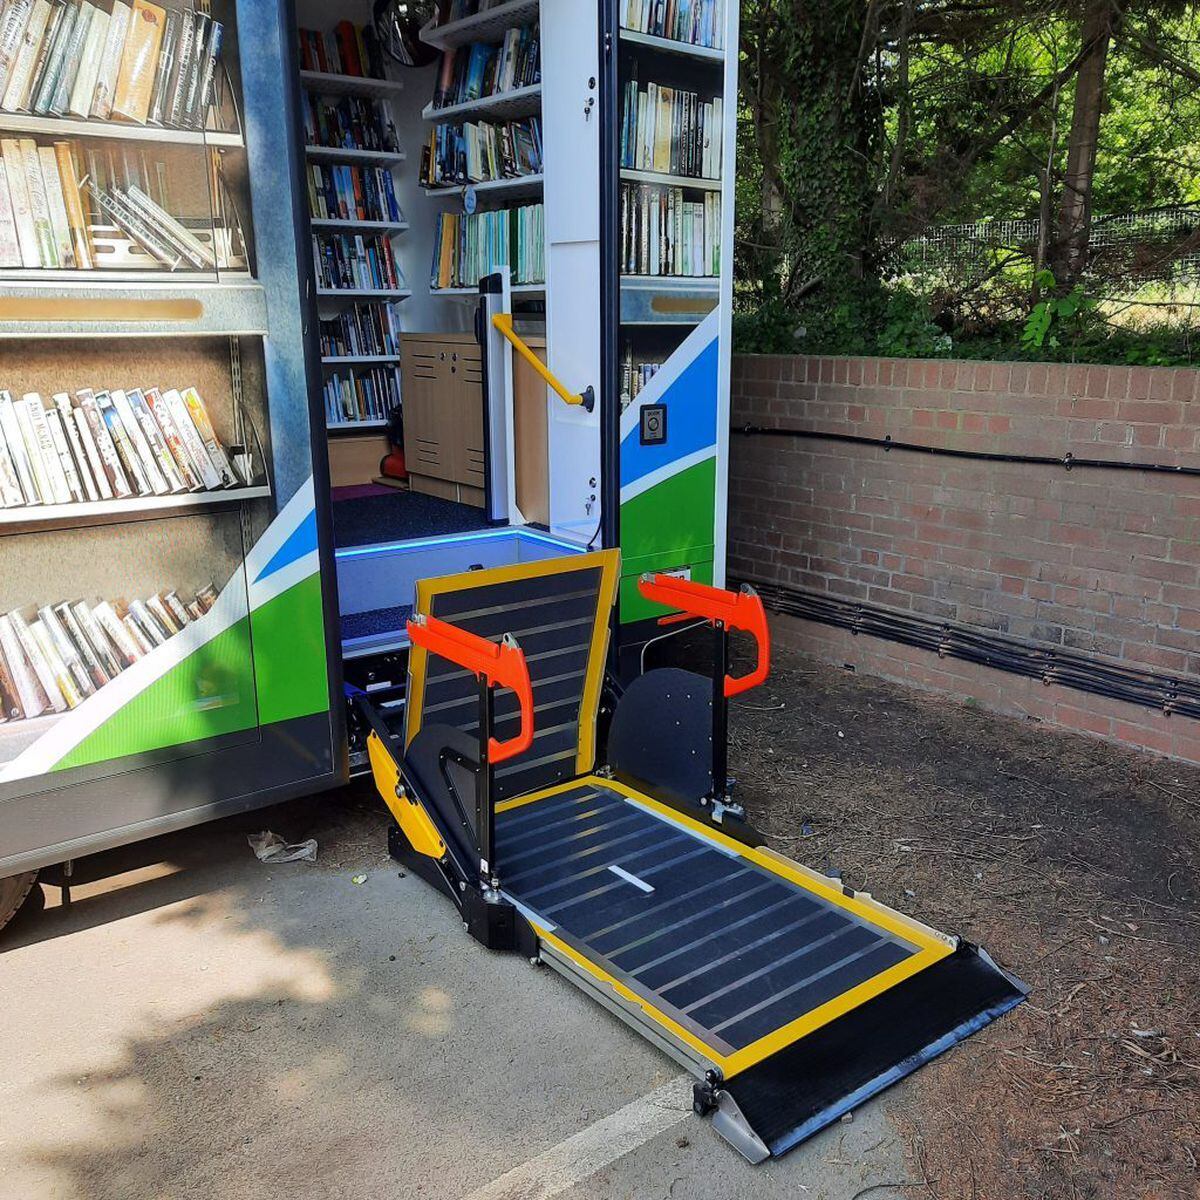 The mobile library is accessible for the disabled